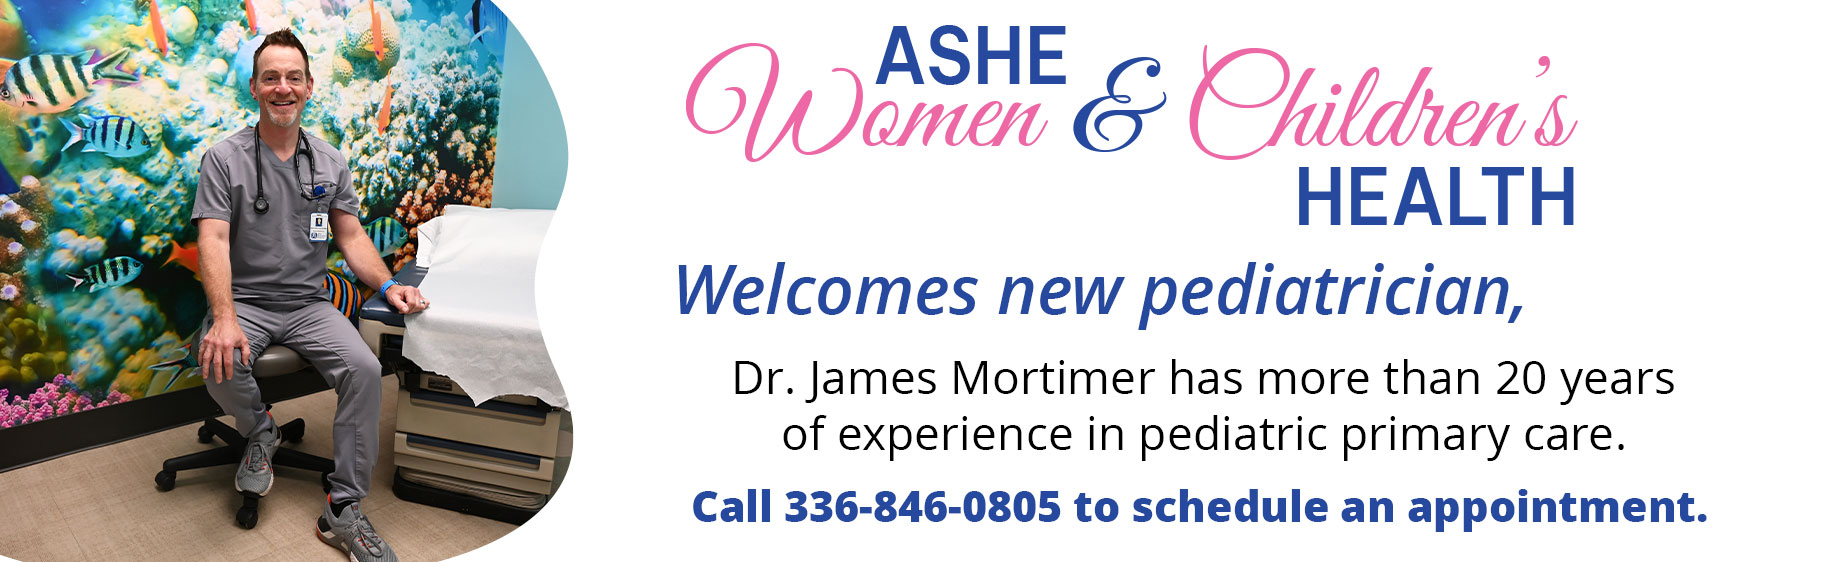 Ashe Women & Children's Health welcomes new pediatrician 
Dr. James Mortimer has more than 20 years of experience in pediatric primary care. 
Call 336-846-0805 to schedule an appointment.